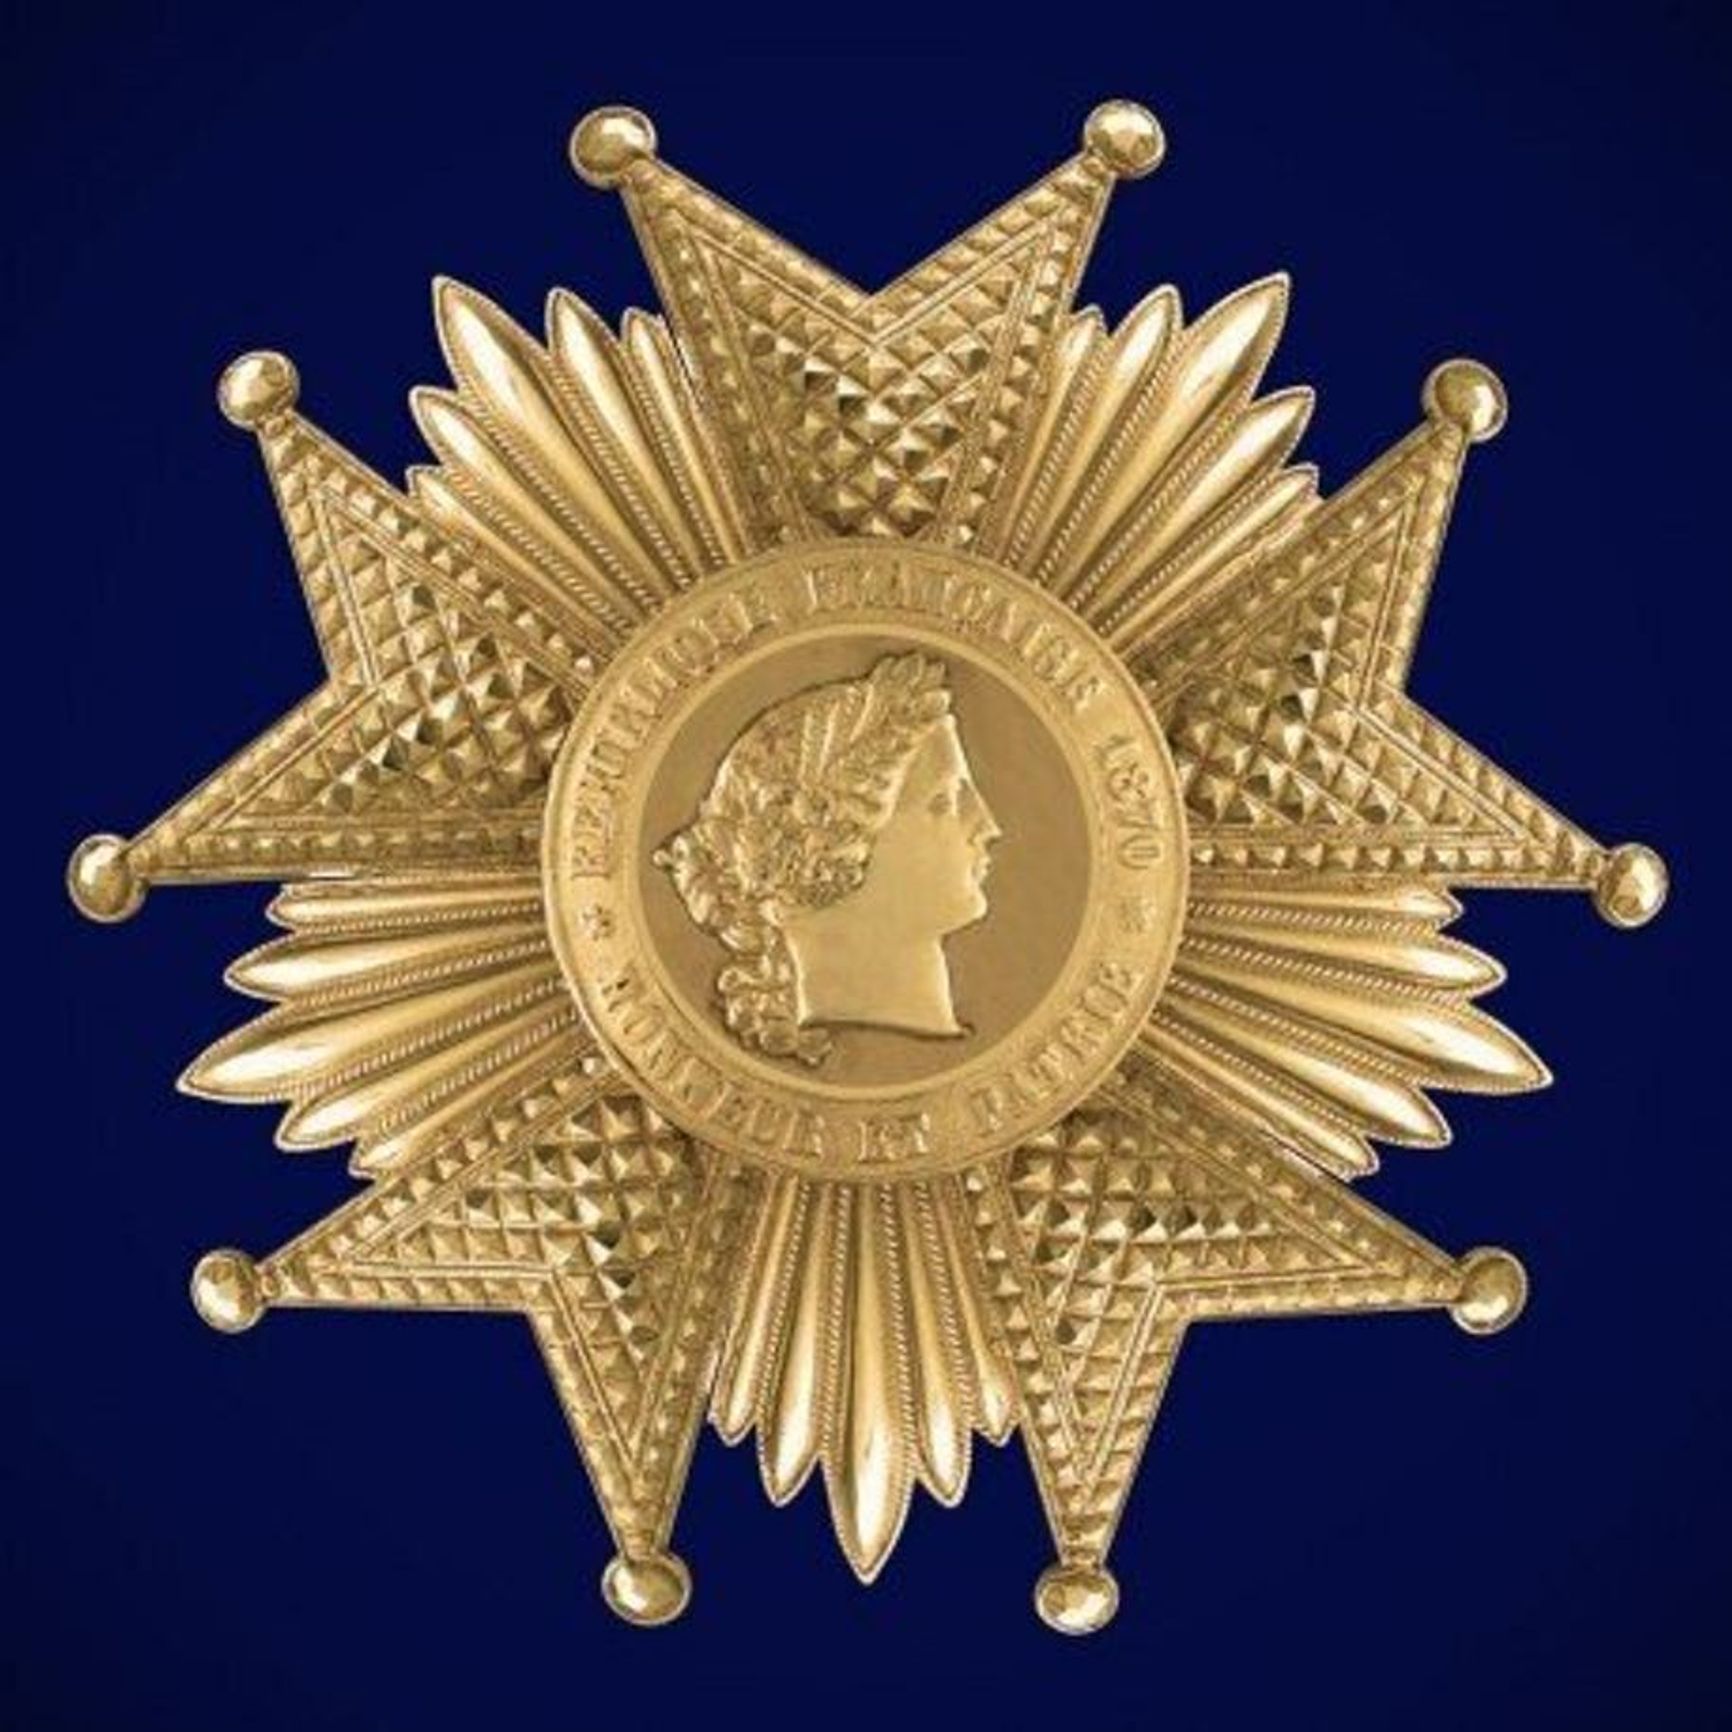 The National Order of the Legion of Honor (Légion d'honneur)